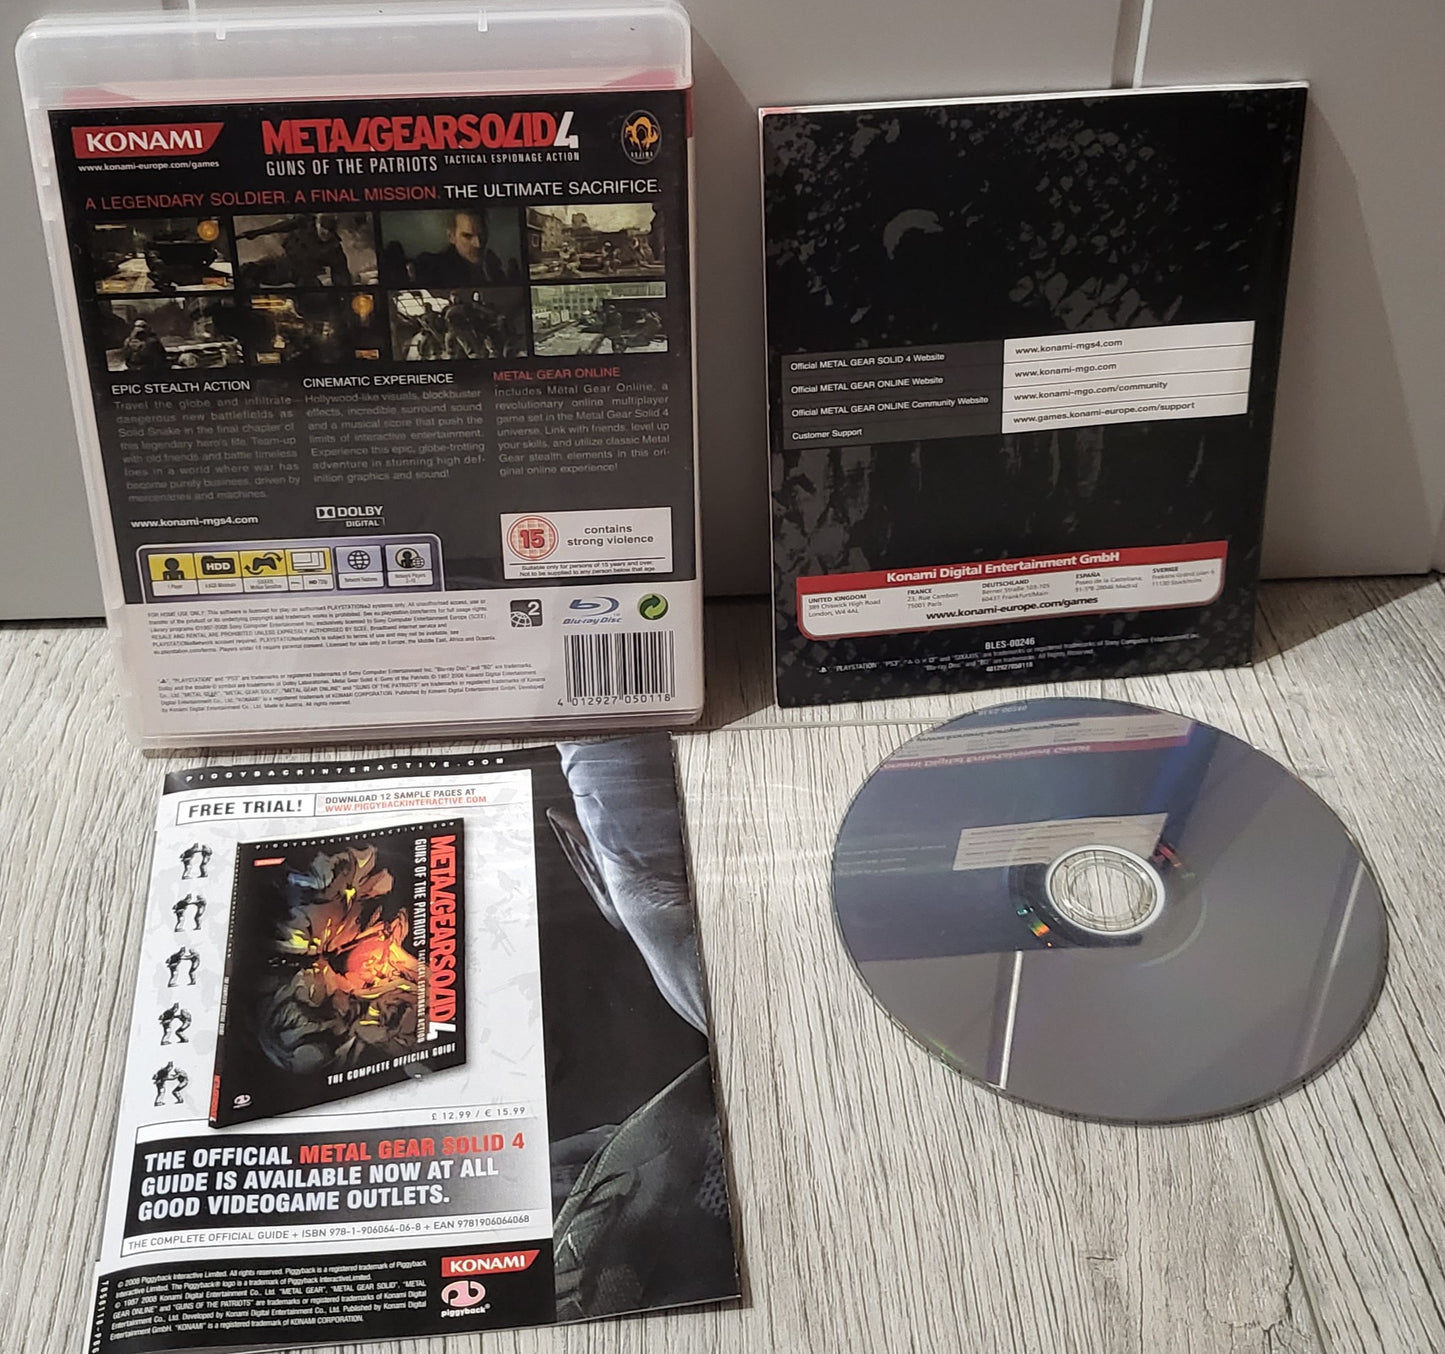 Metal Gear Solid 4 Guns of the Patriots Sony Playstation 3 (PS3) Game